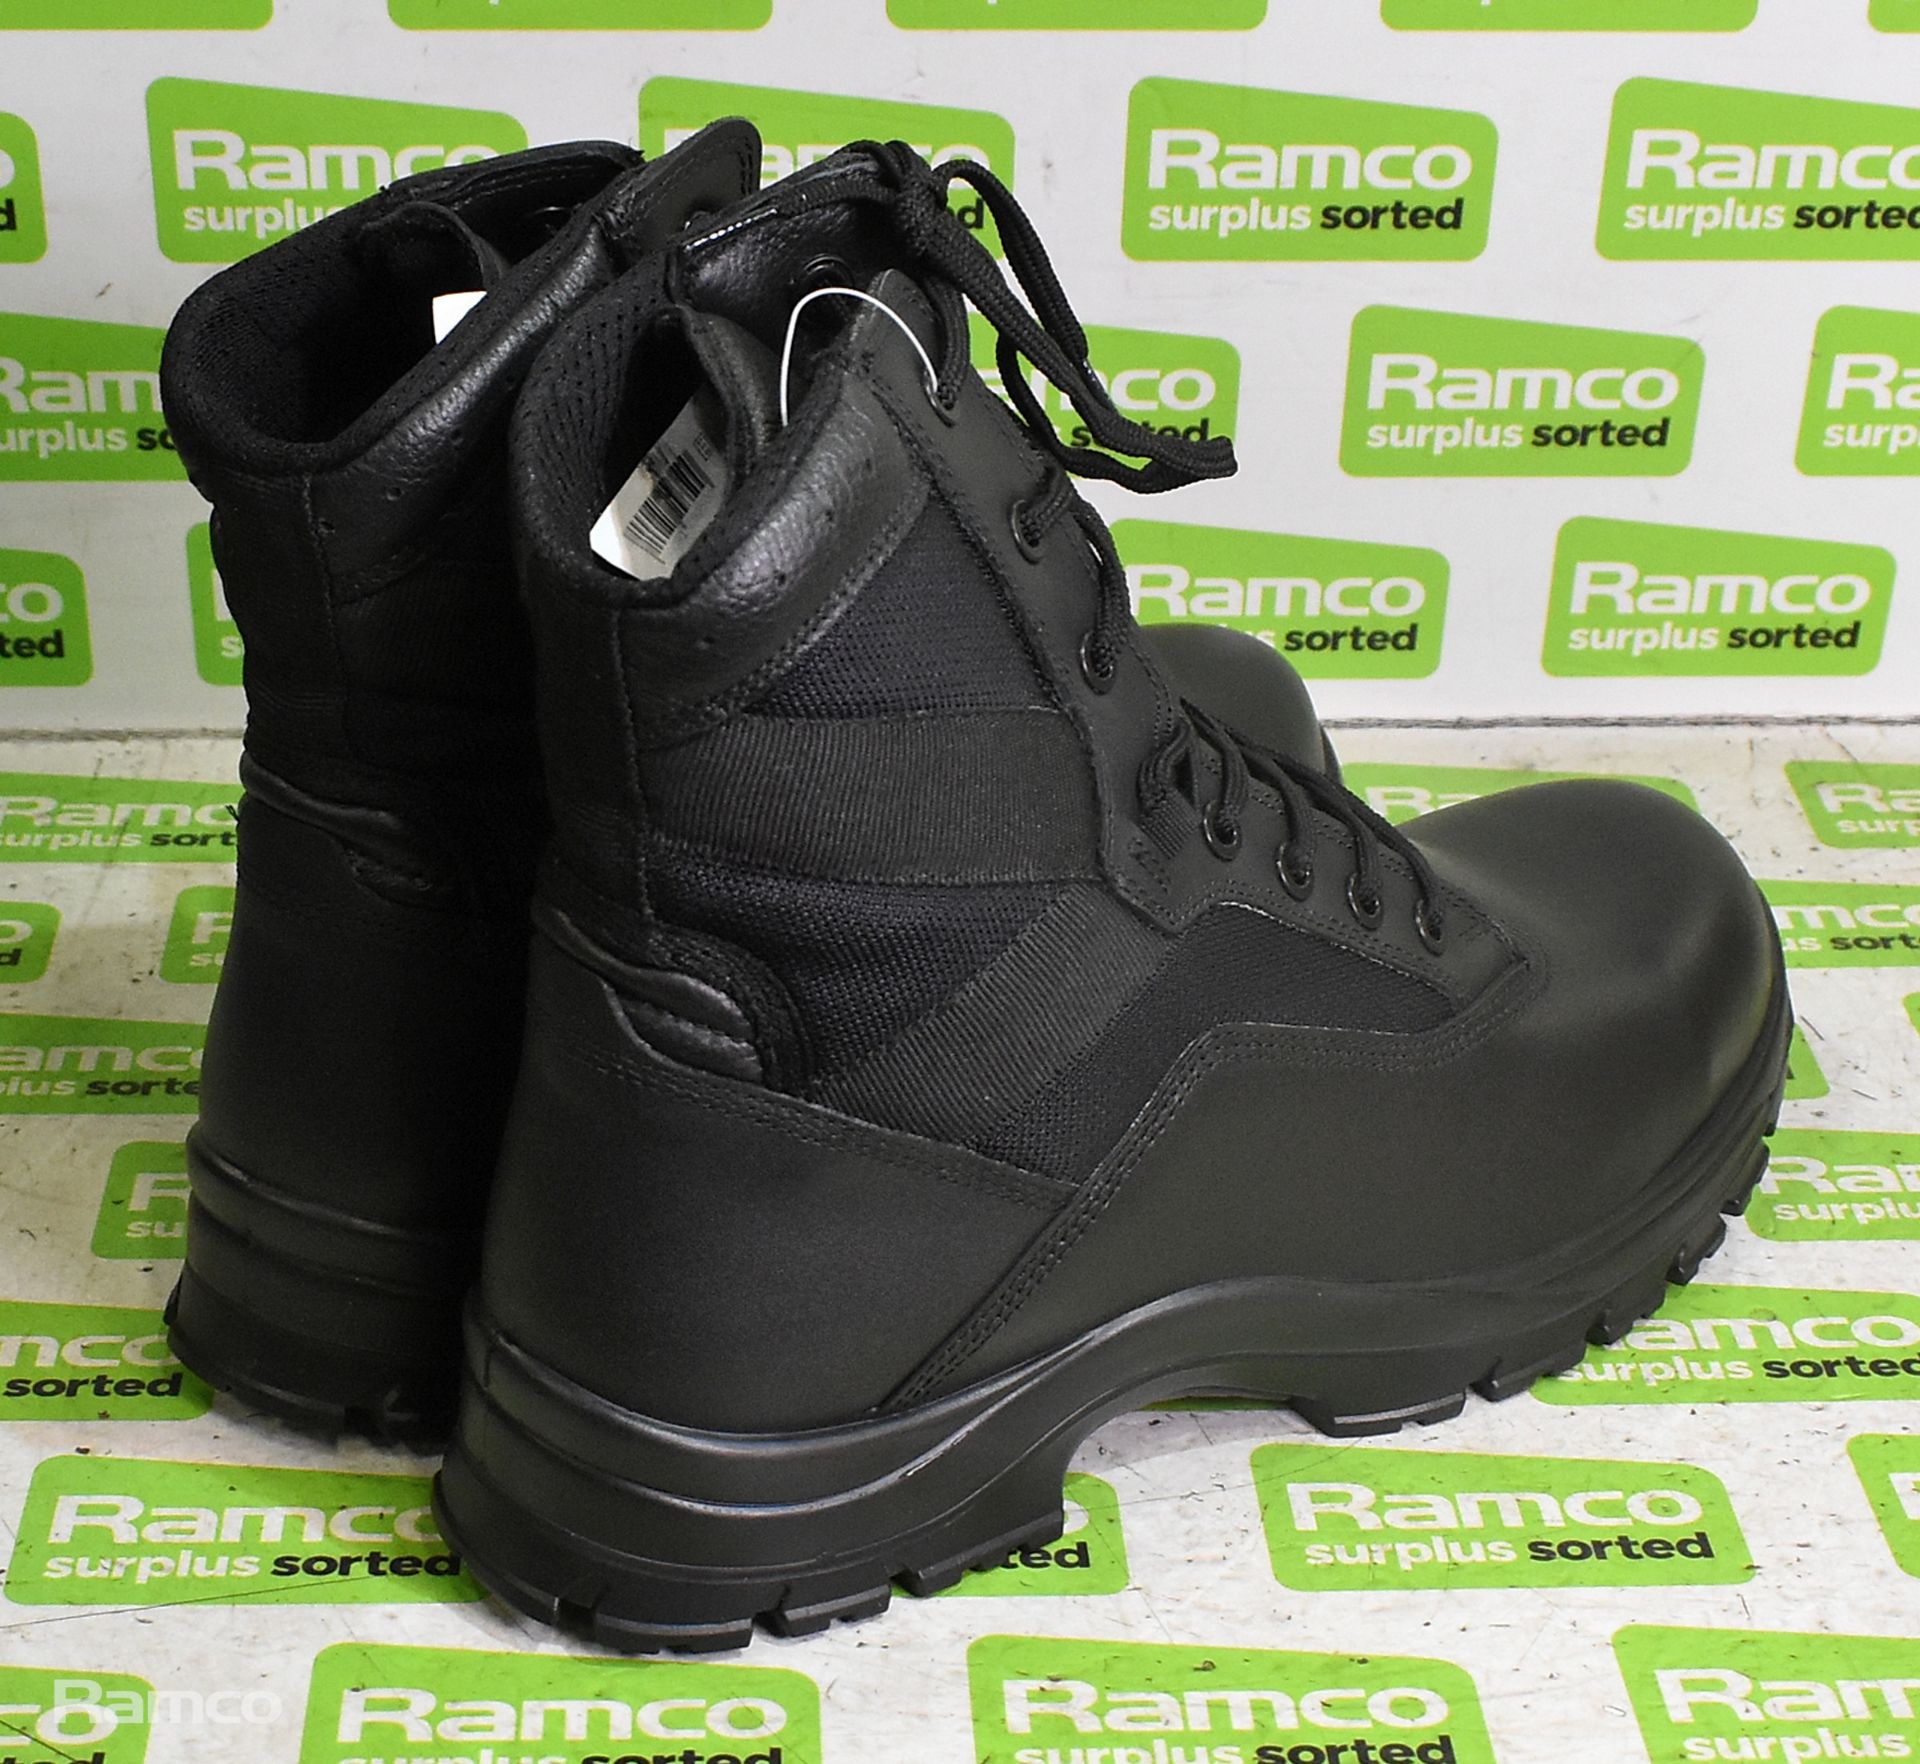 1x pair of Goliath warm weather boots - Size 11L - Image 3 of 5